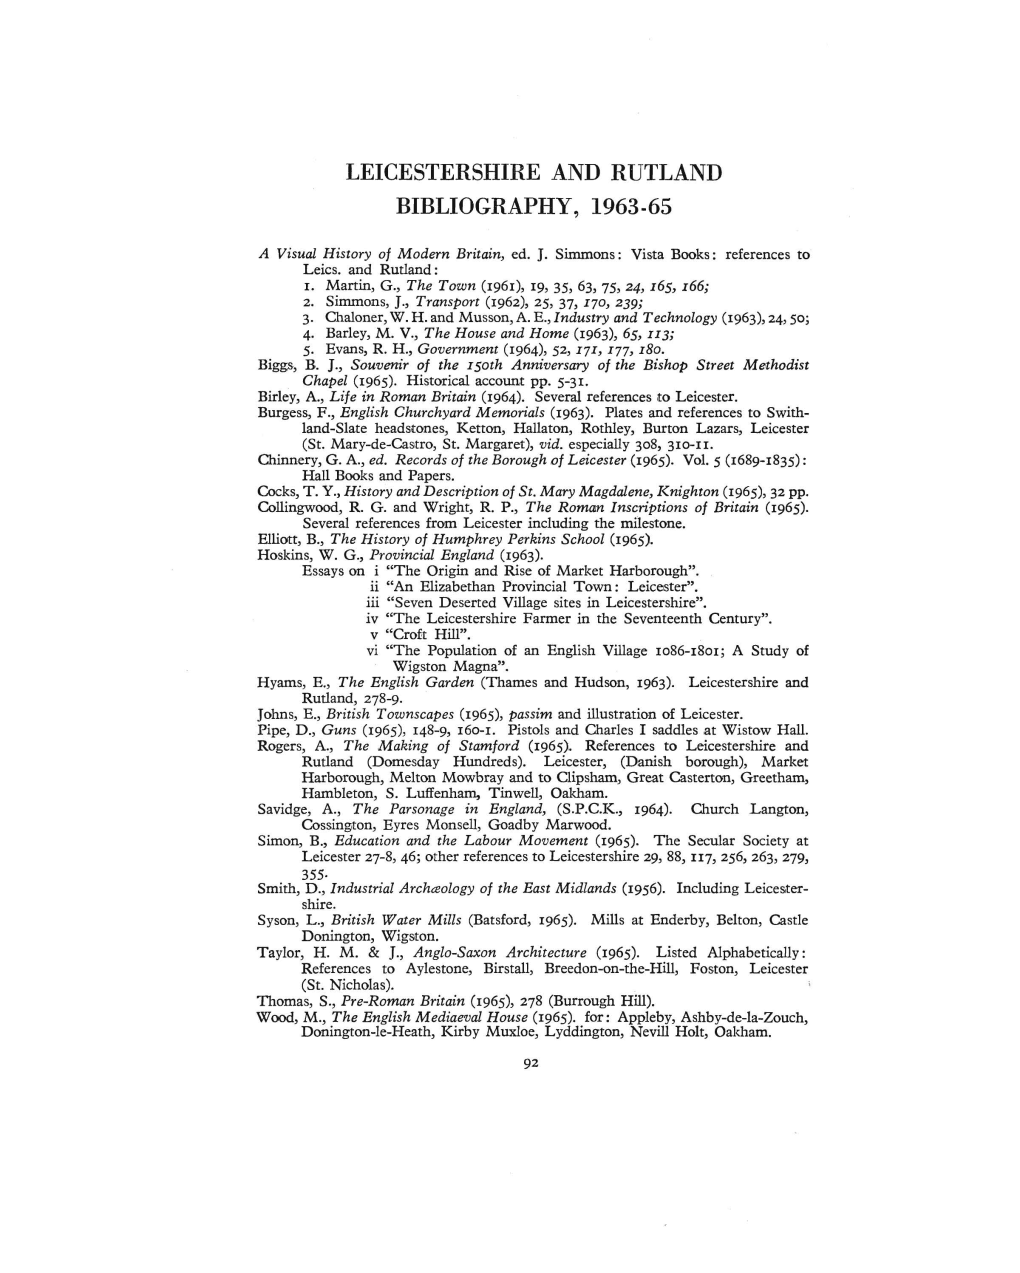 Leicestershire and Rutland Bibliography, 1963-65